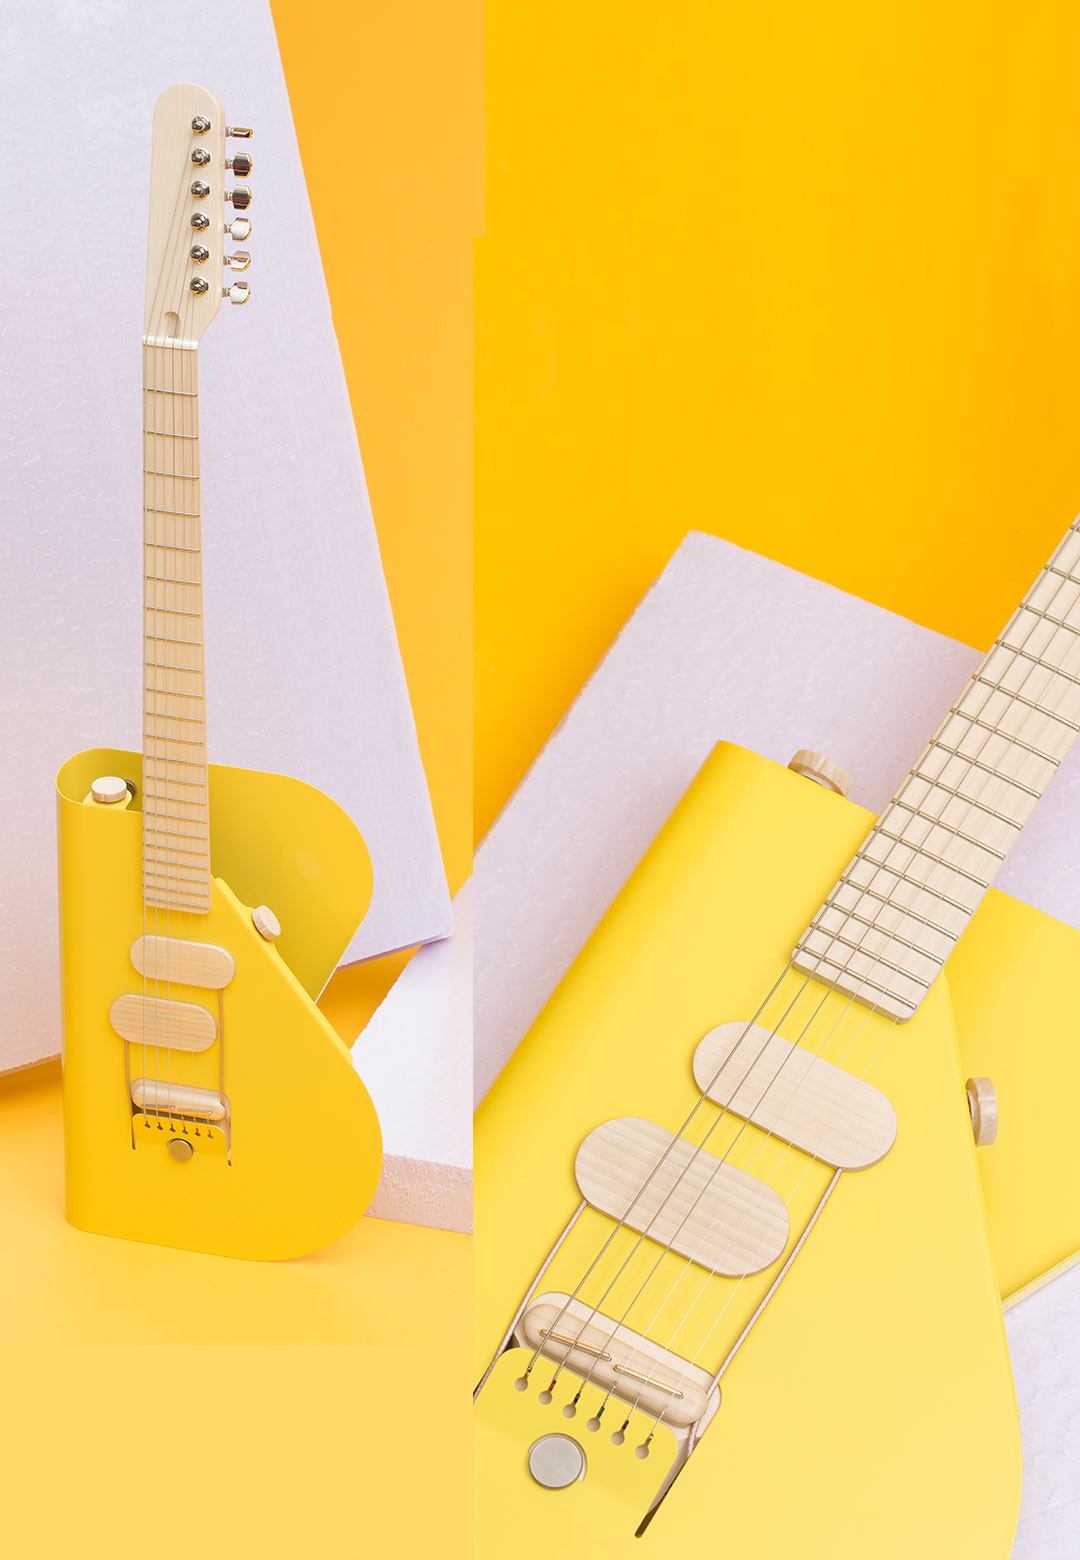 Verso dreams up a modernistic electric guitar with Cosmo